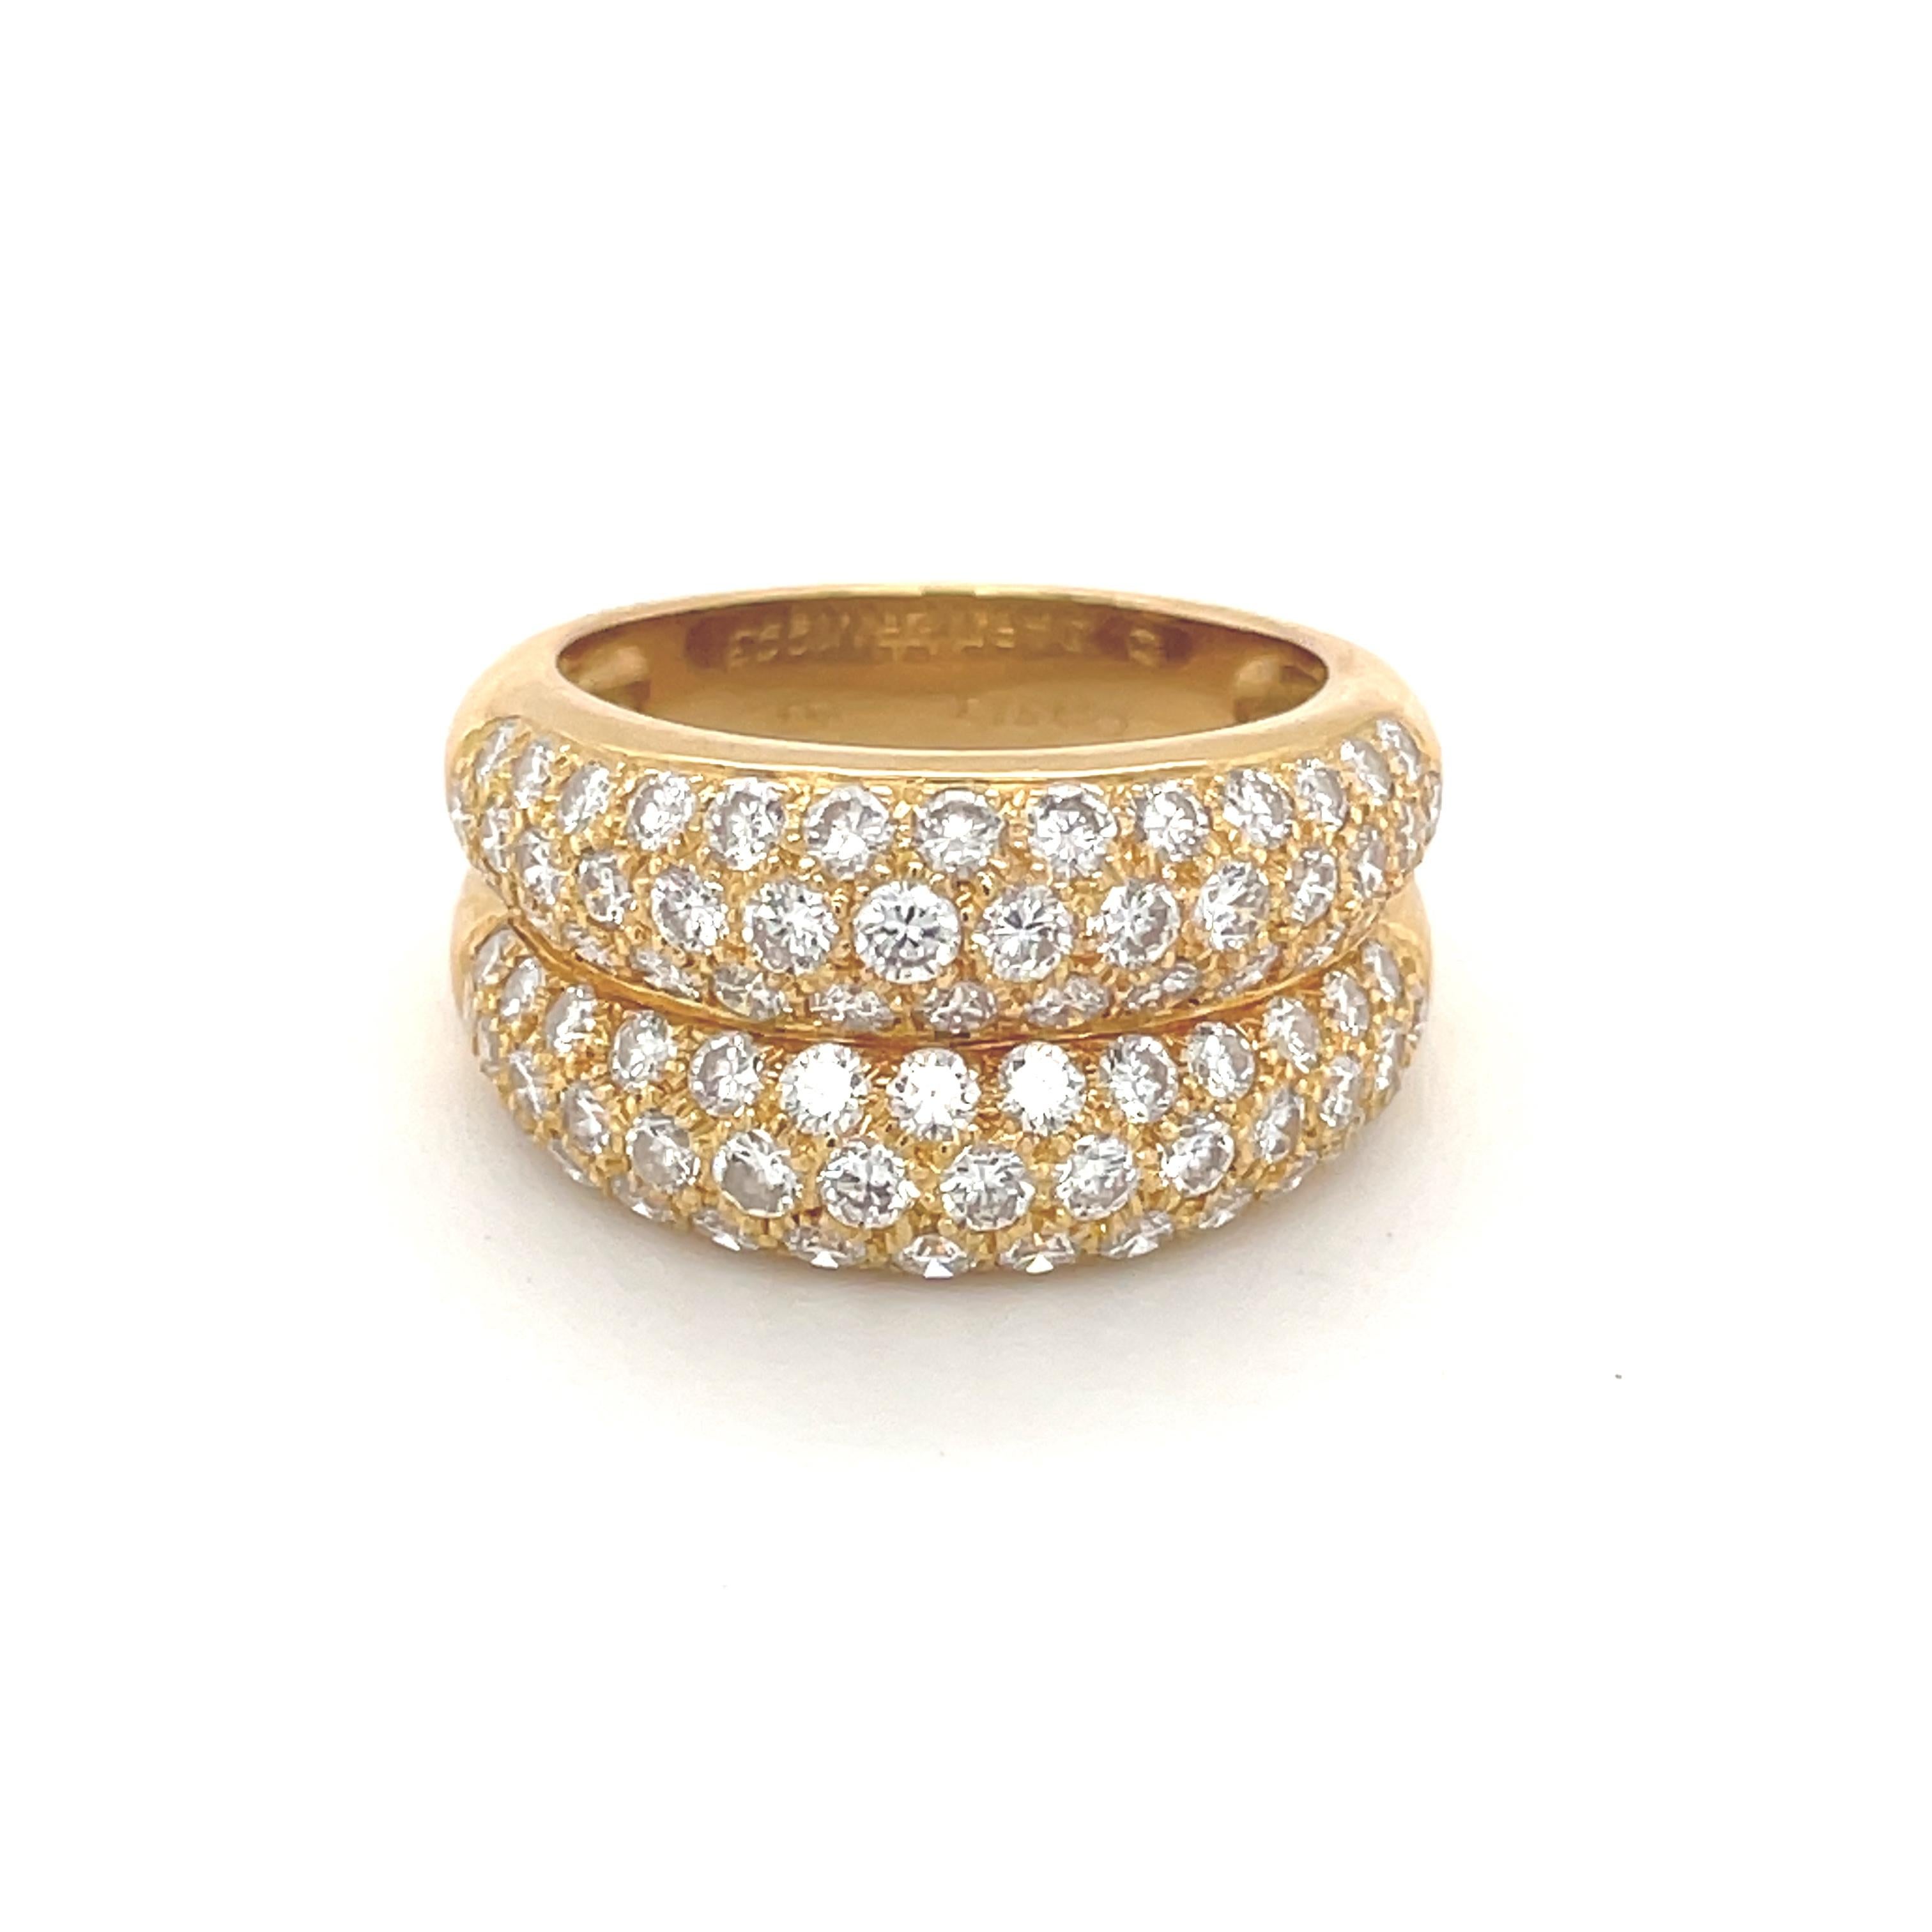 Cartier 18K Yellow Gold Double Pave Diamond Band.  The ring features 2.90ctw of brilliant round diamonds. Stamped Cartier 750. Ring size 6.5, weighs 9.09 grams.